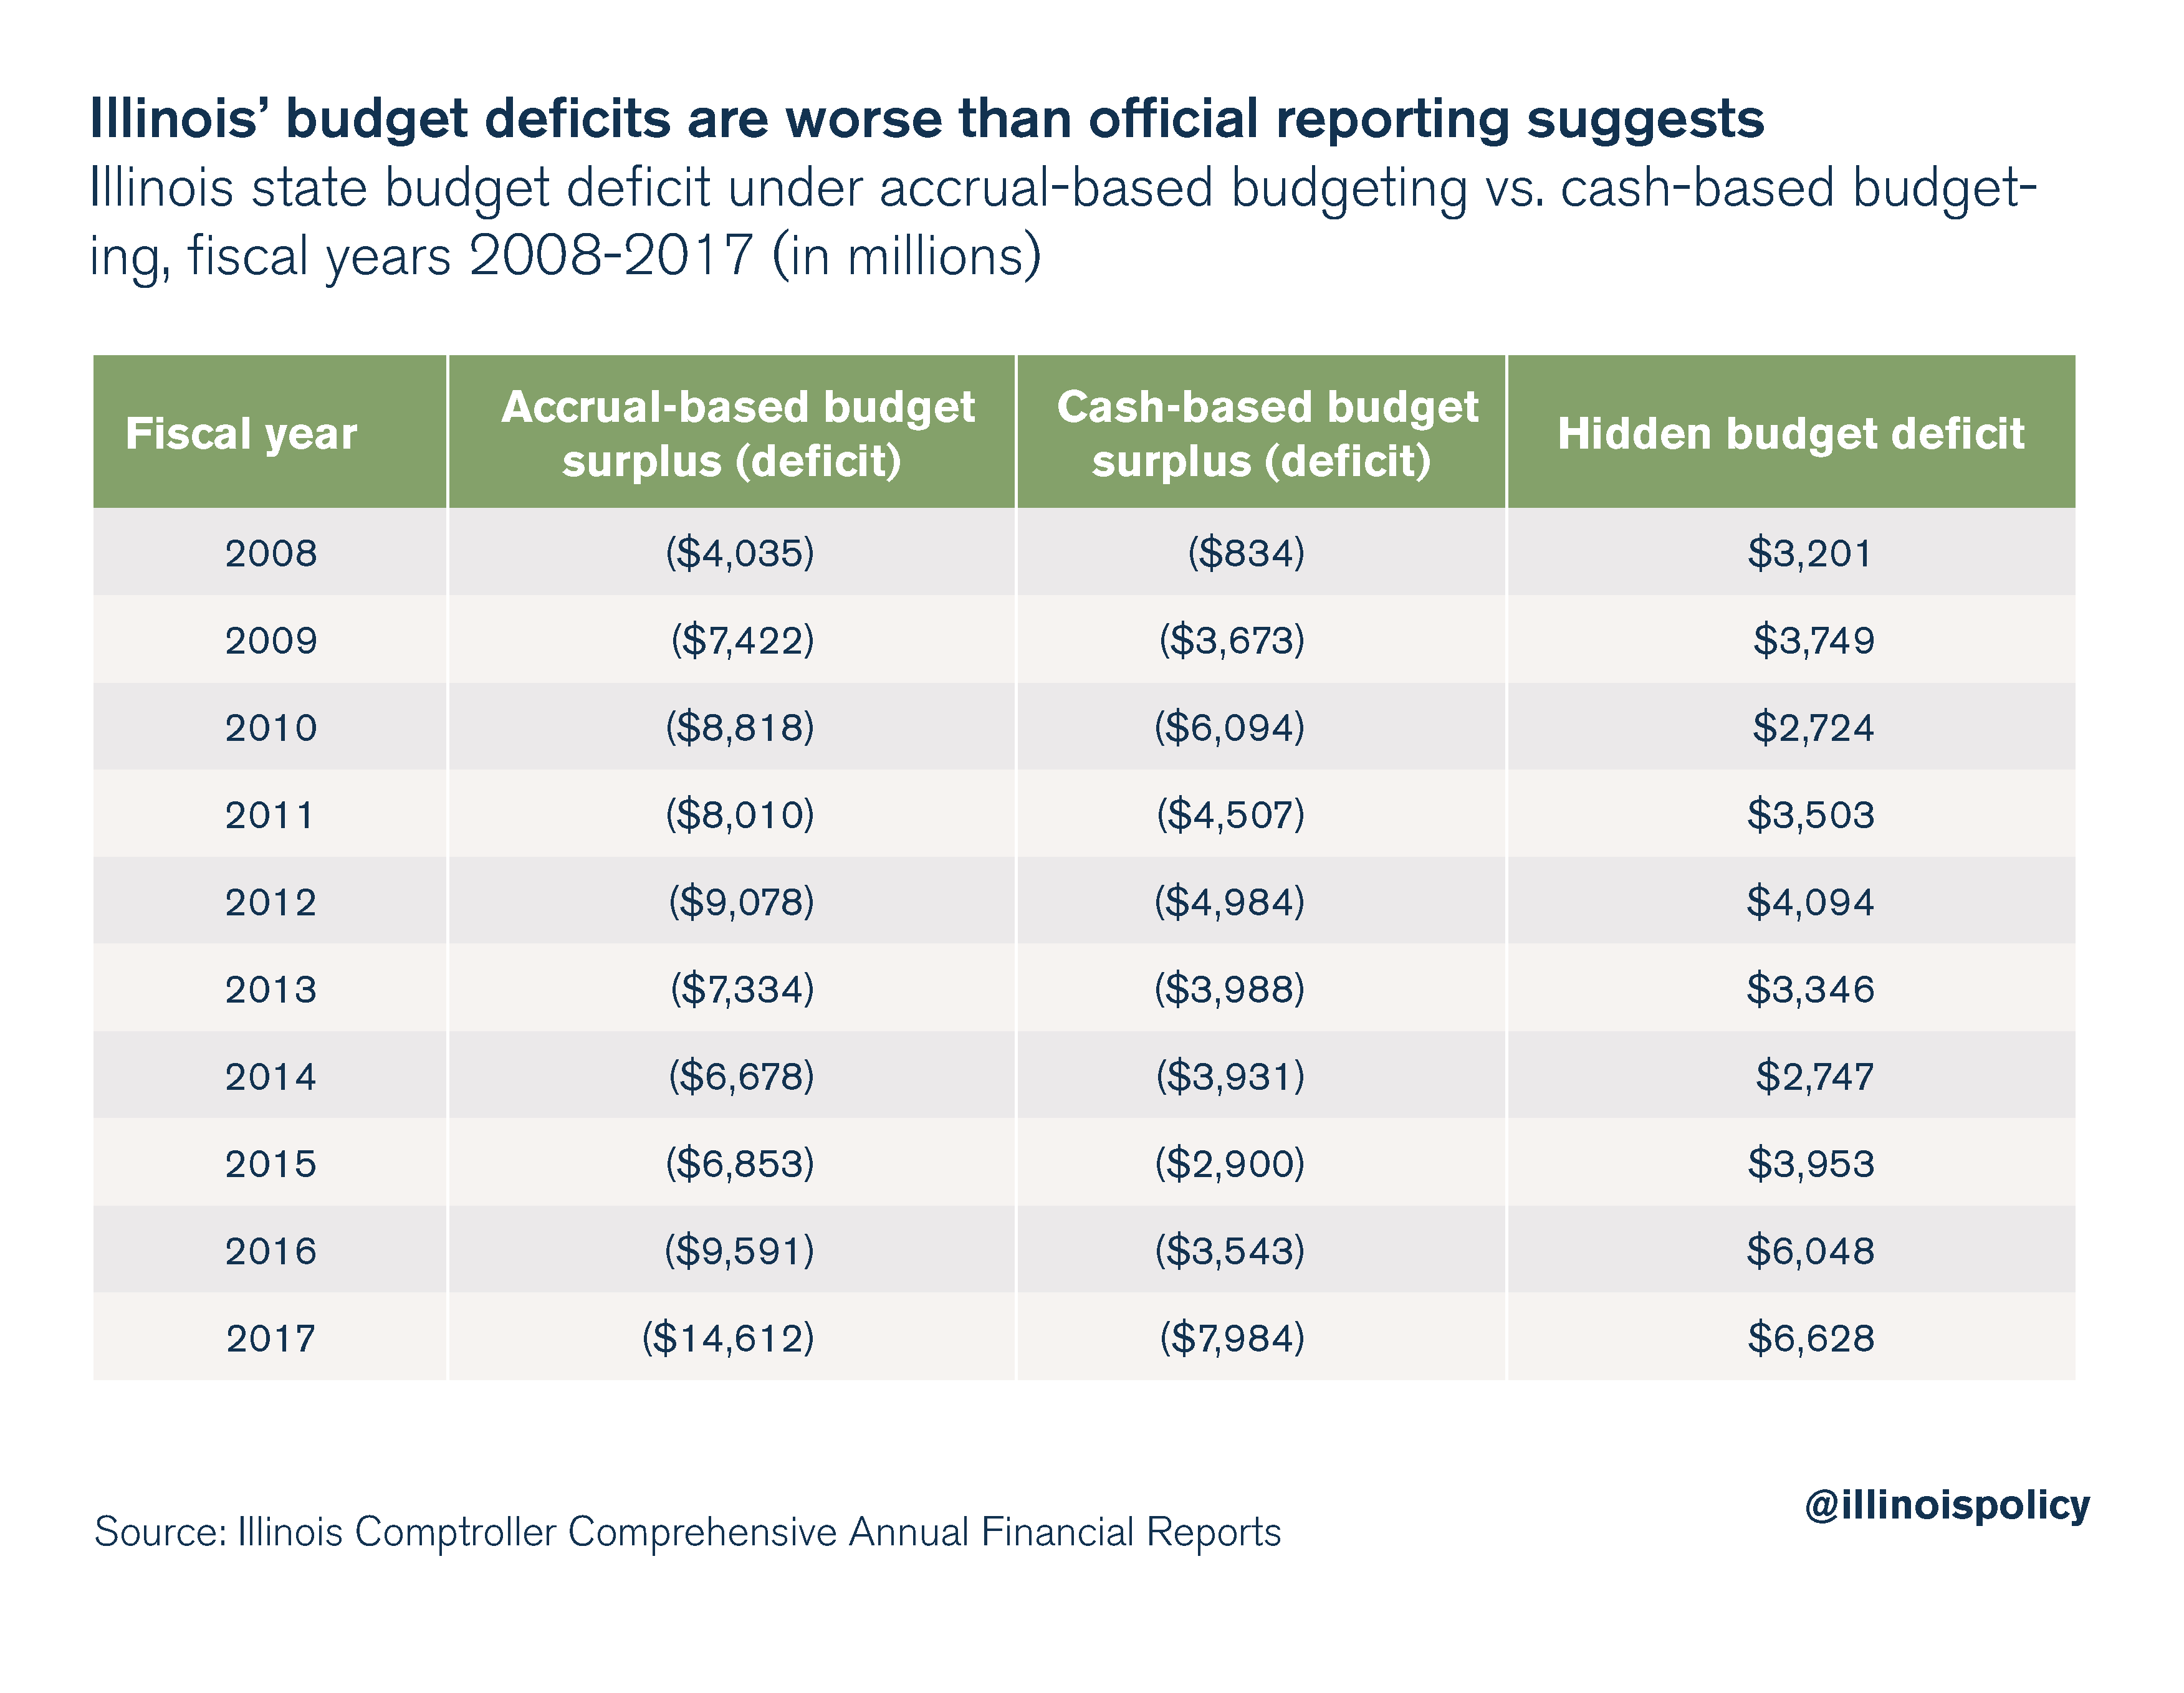 Illinois' budget deficits are worse than official reporting suggests